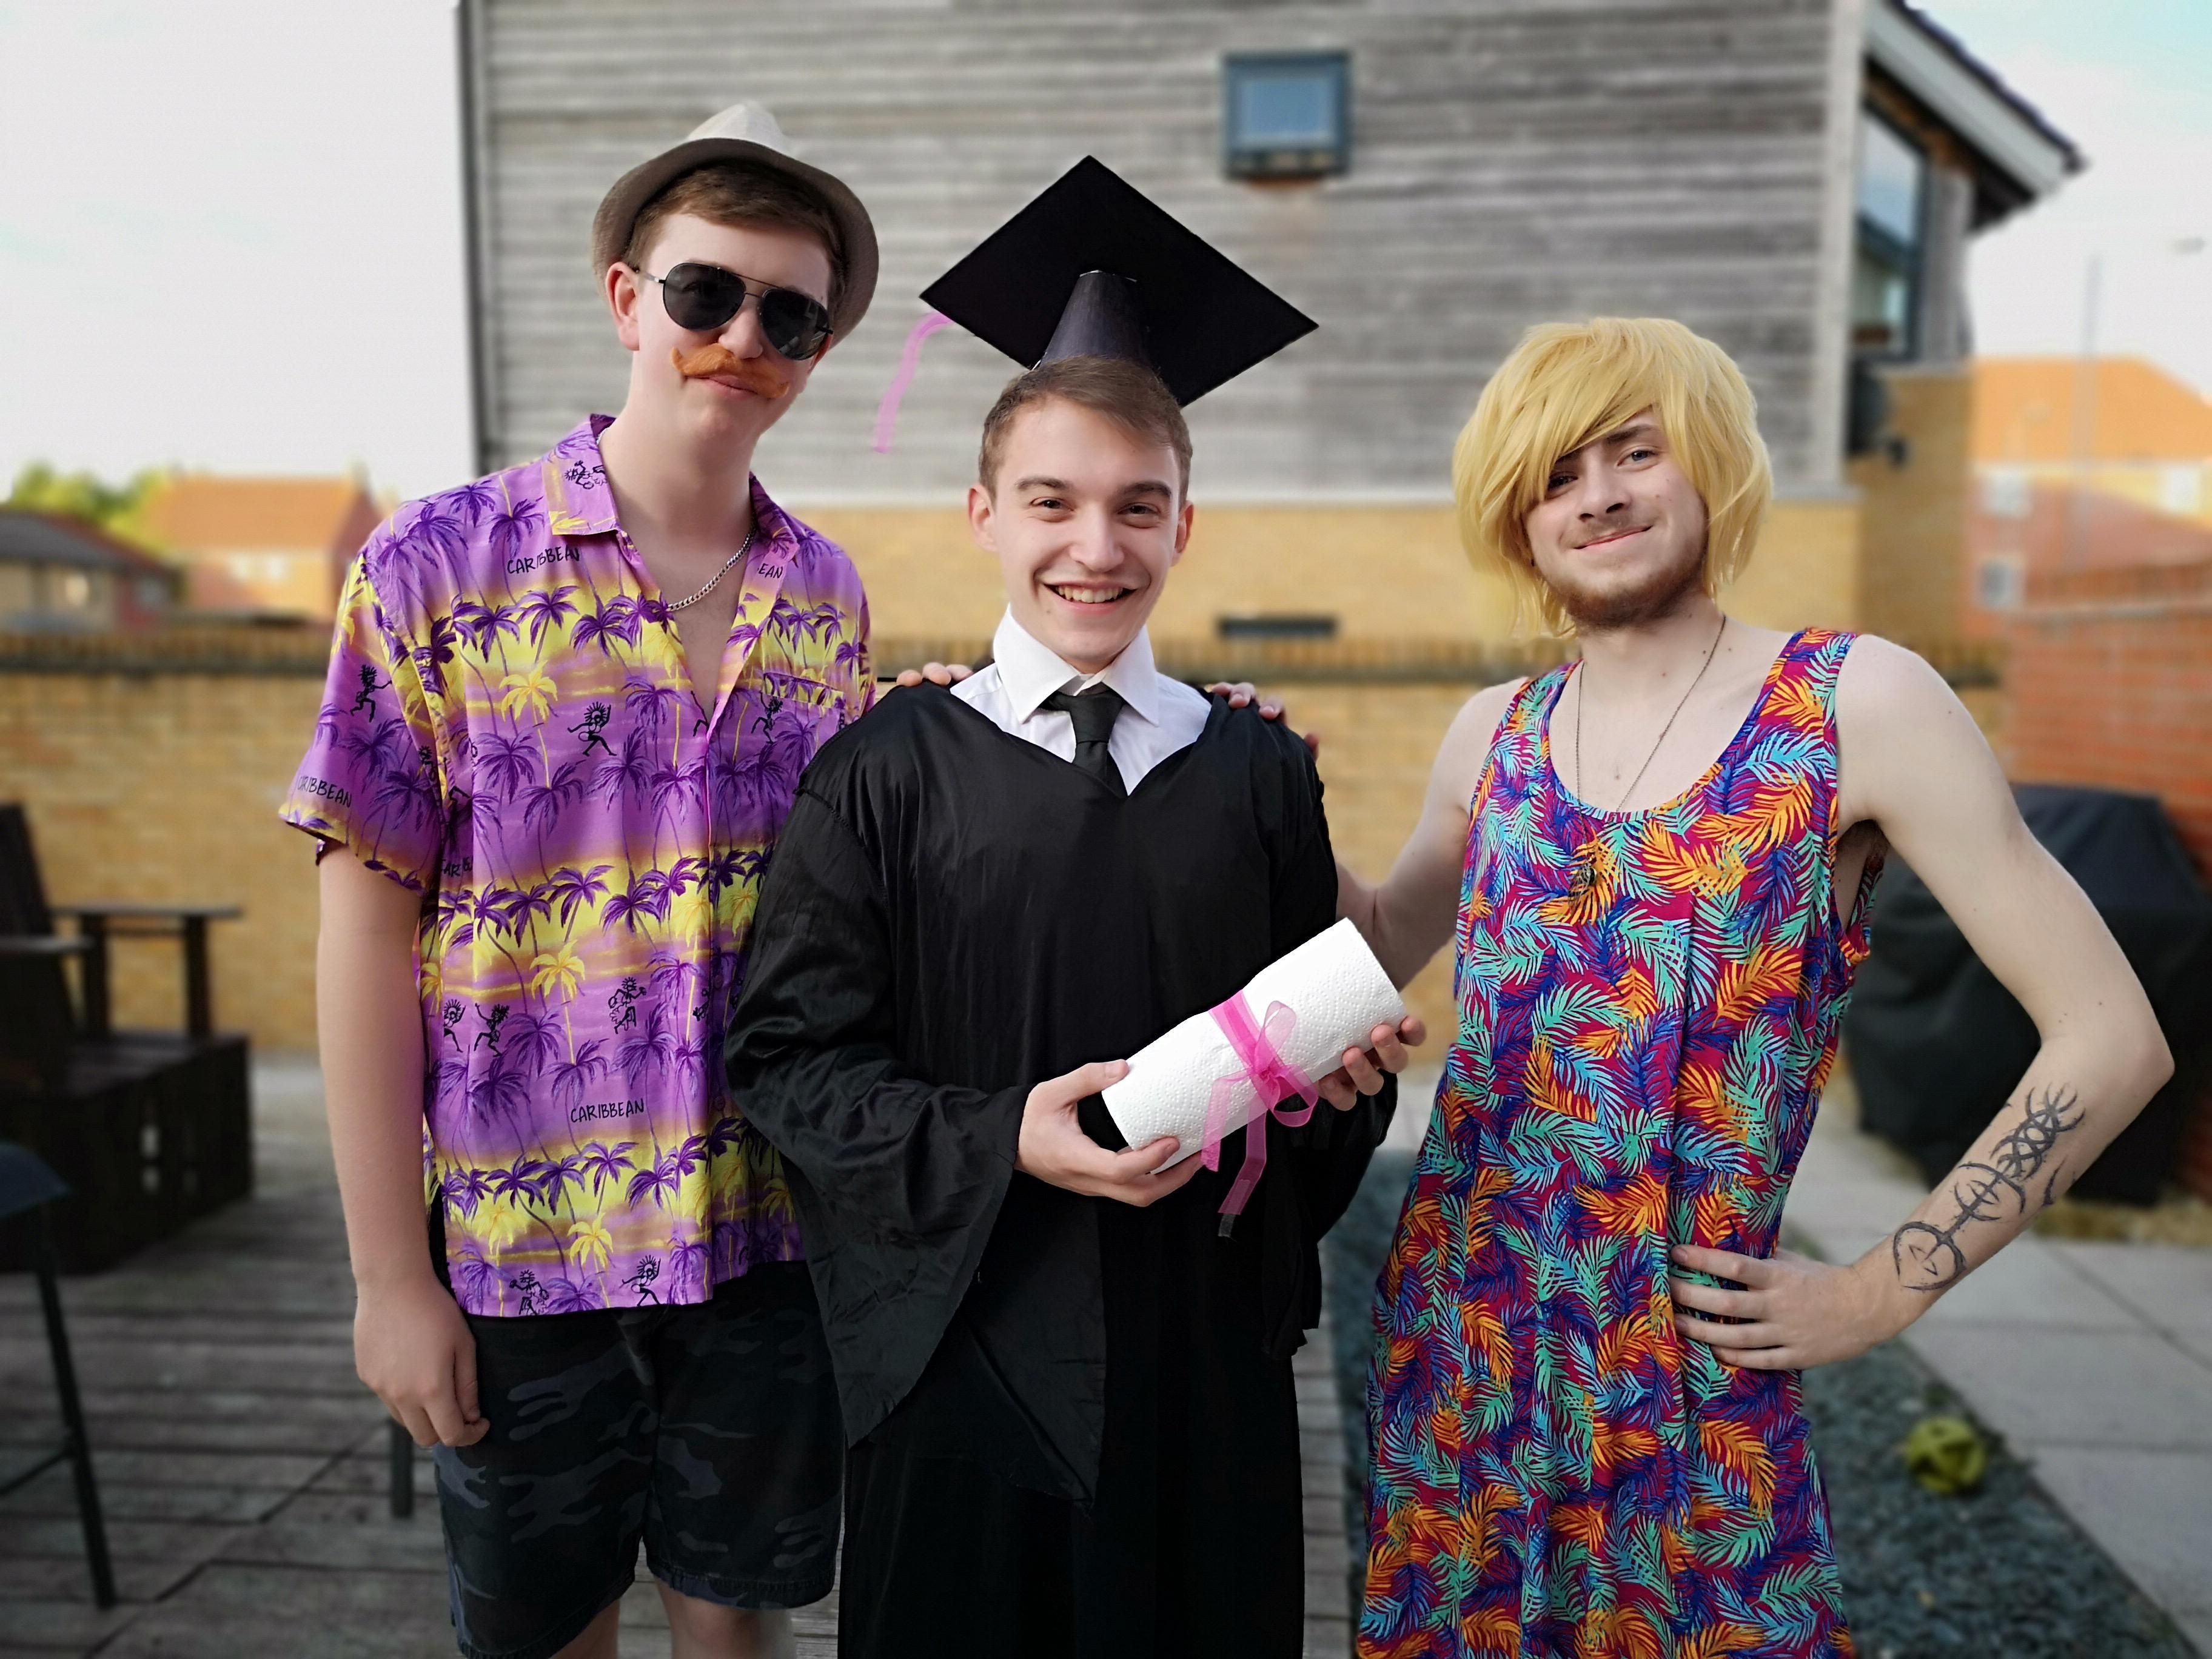 My mate wasn't going to his graduation due to his parent being away. So we took a budget graduation photo and stepped in as "mum" and "dad"